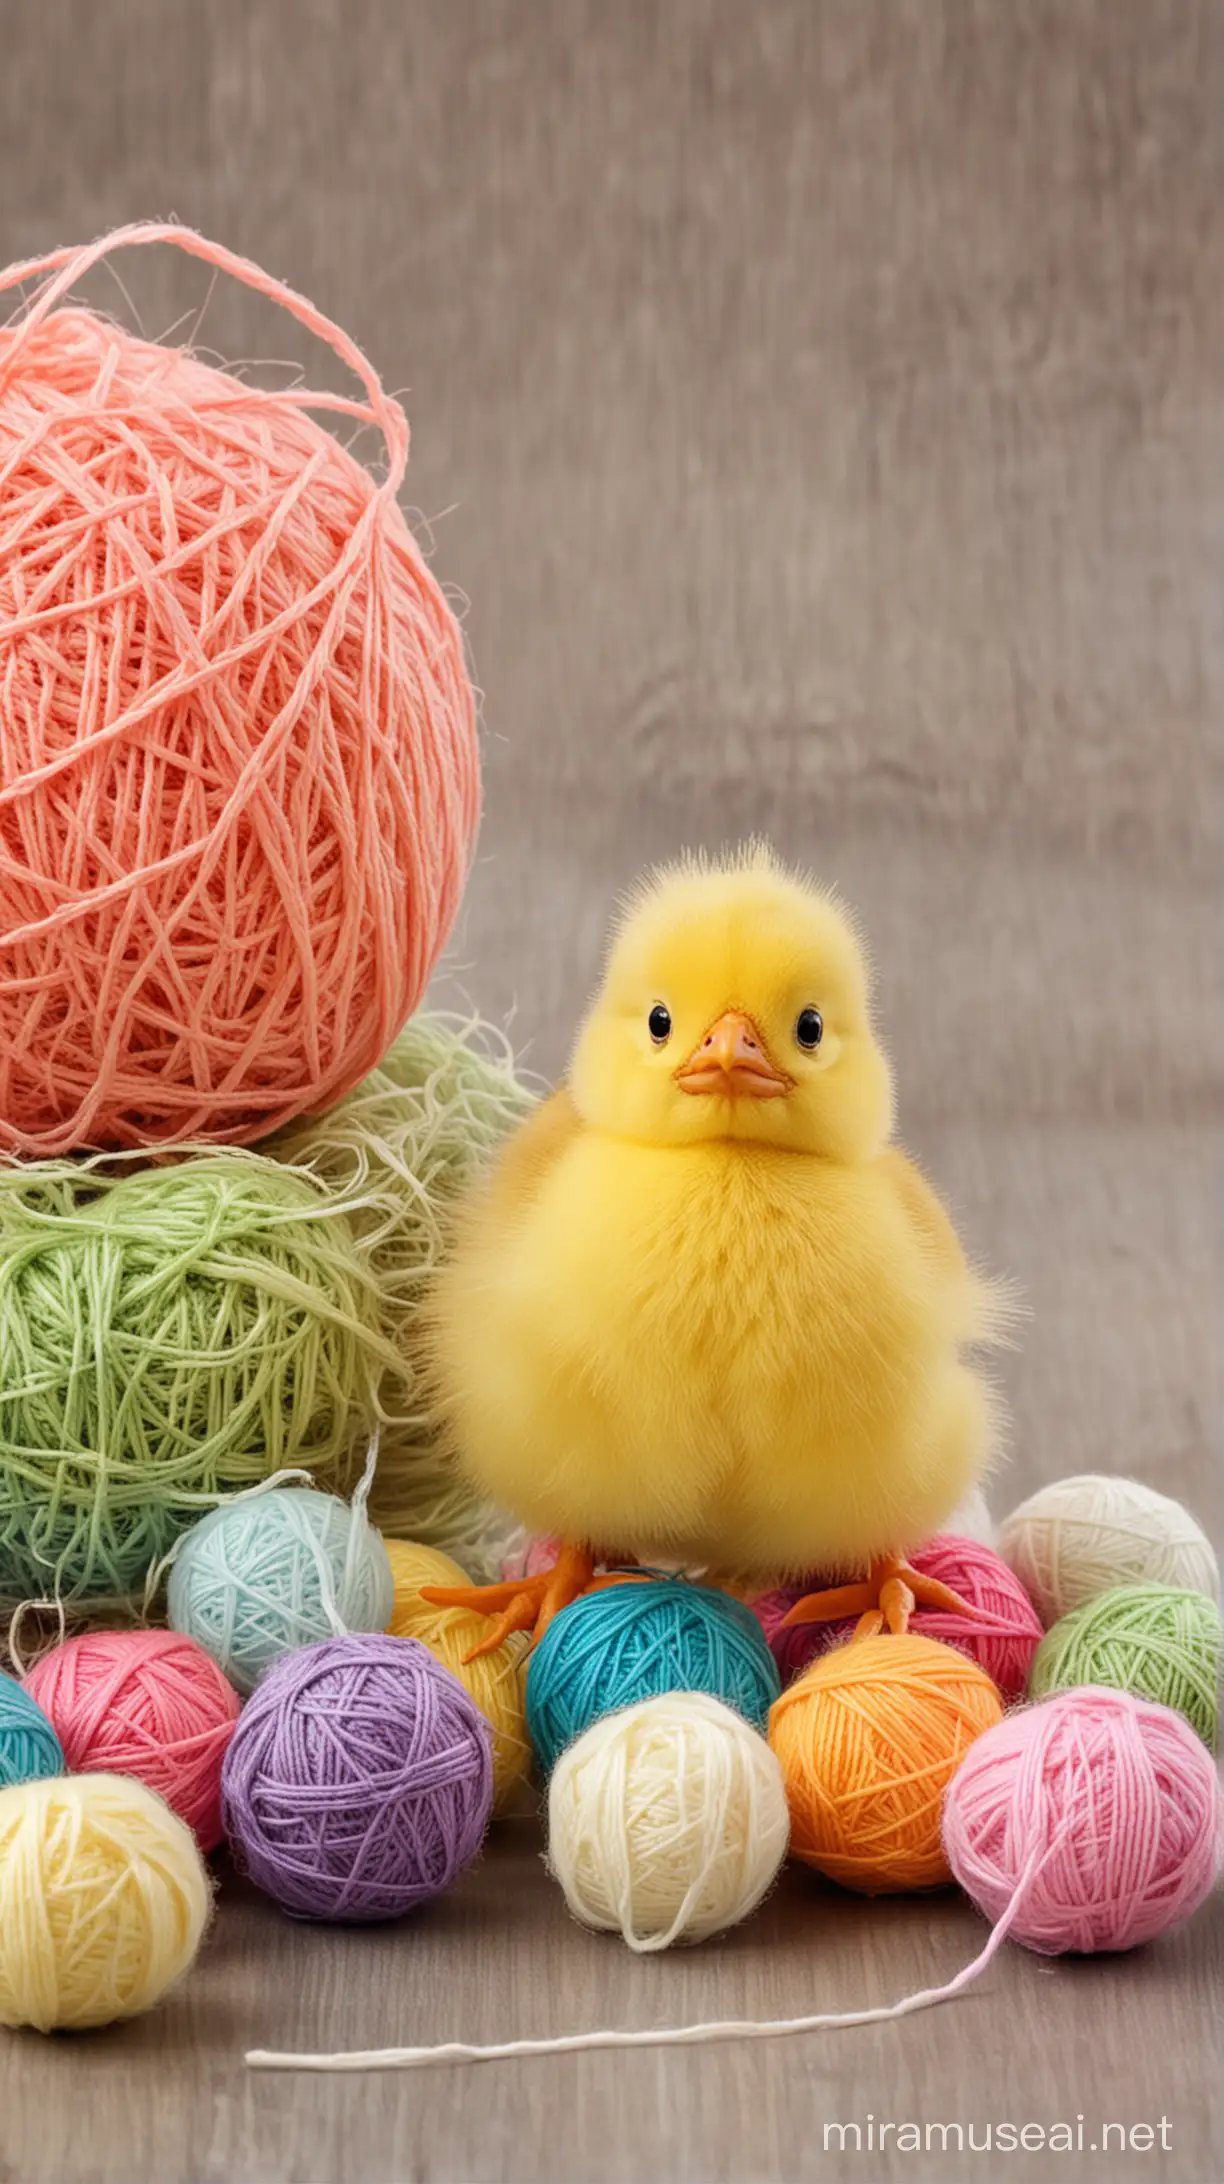 Easter and balls of yarn and little chick
